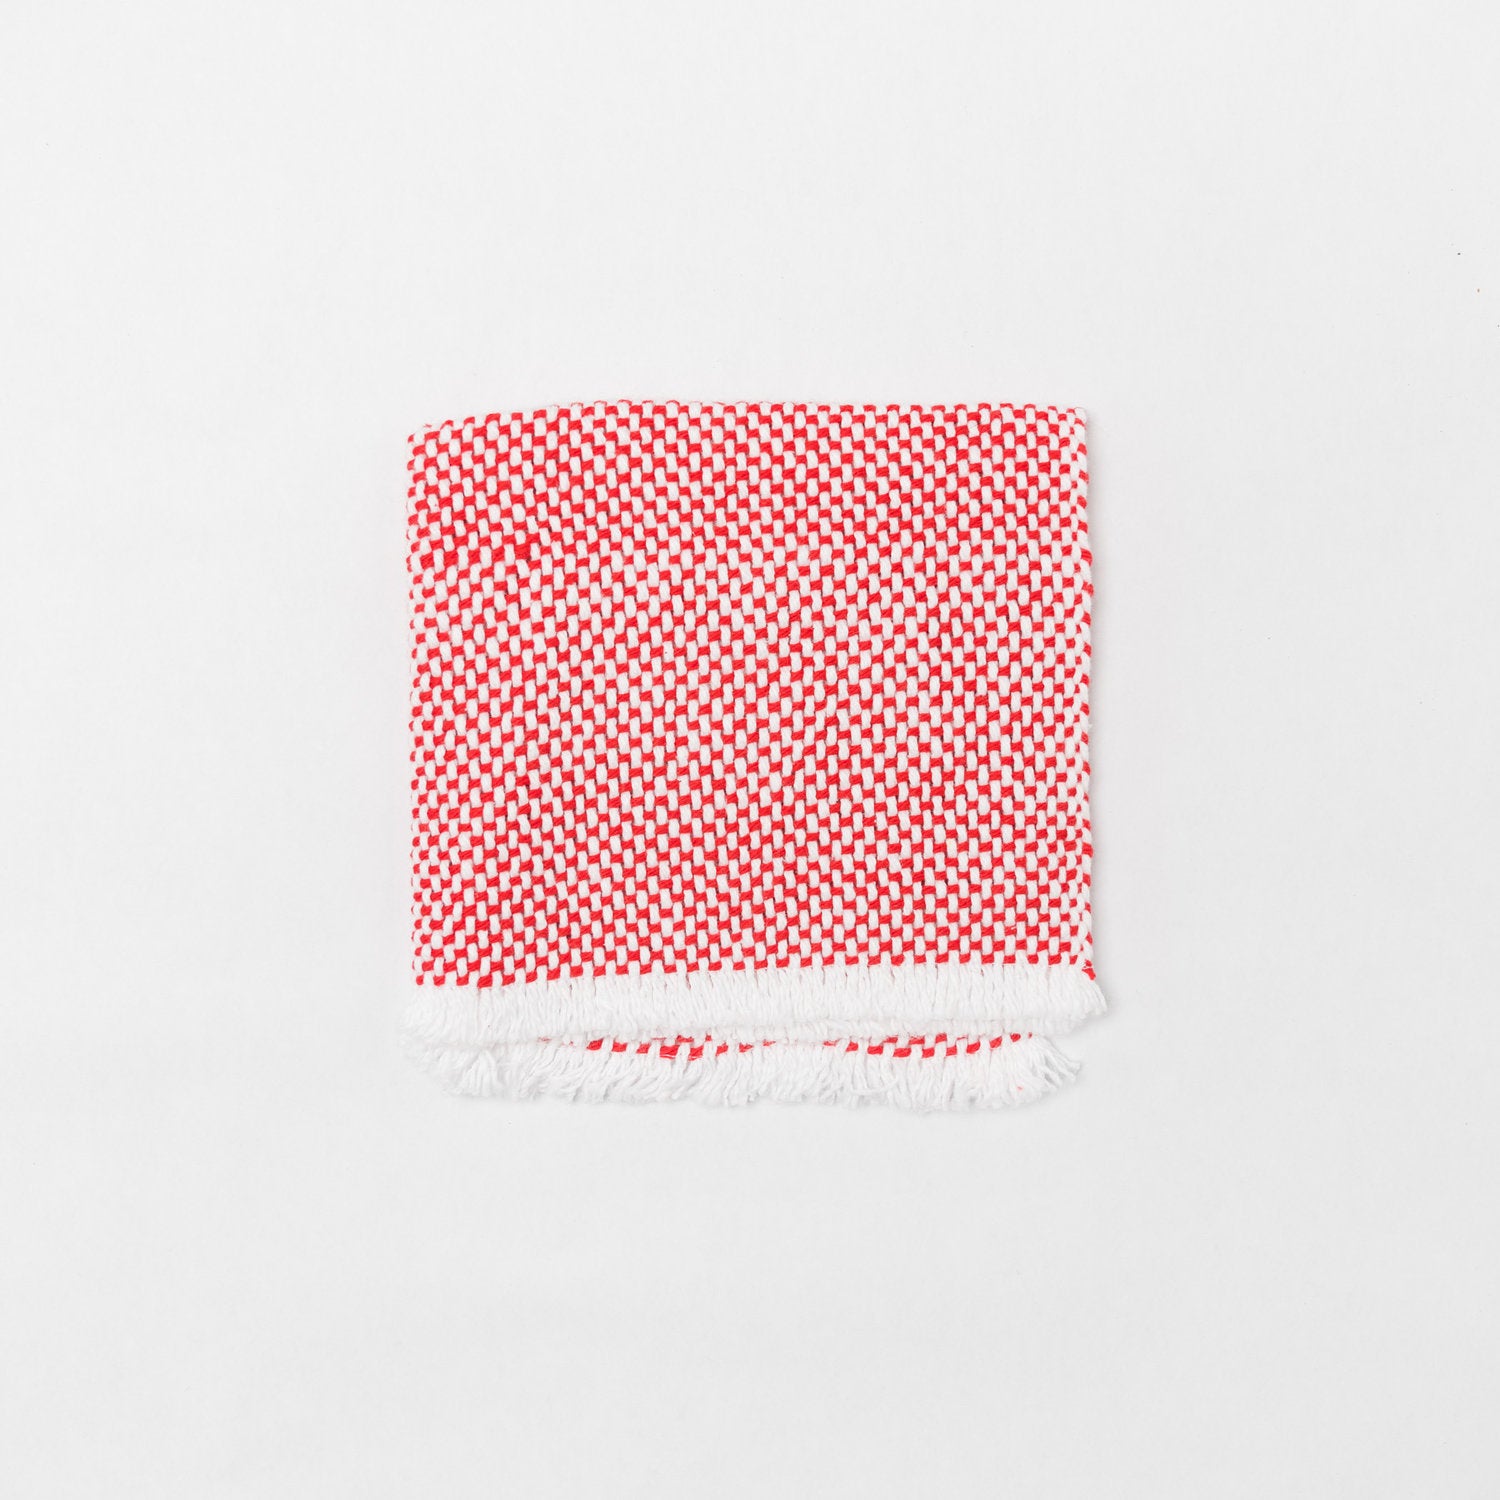 KD Weave Red + White Wash Cloth, Set of 2